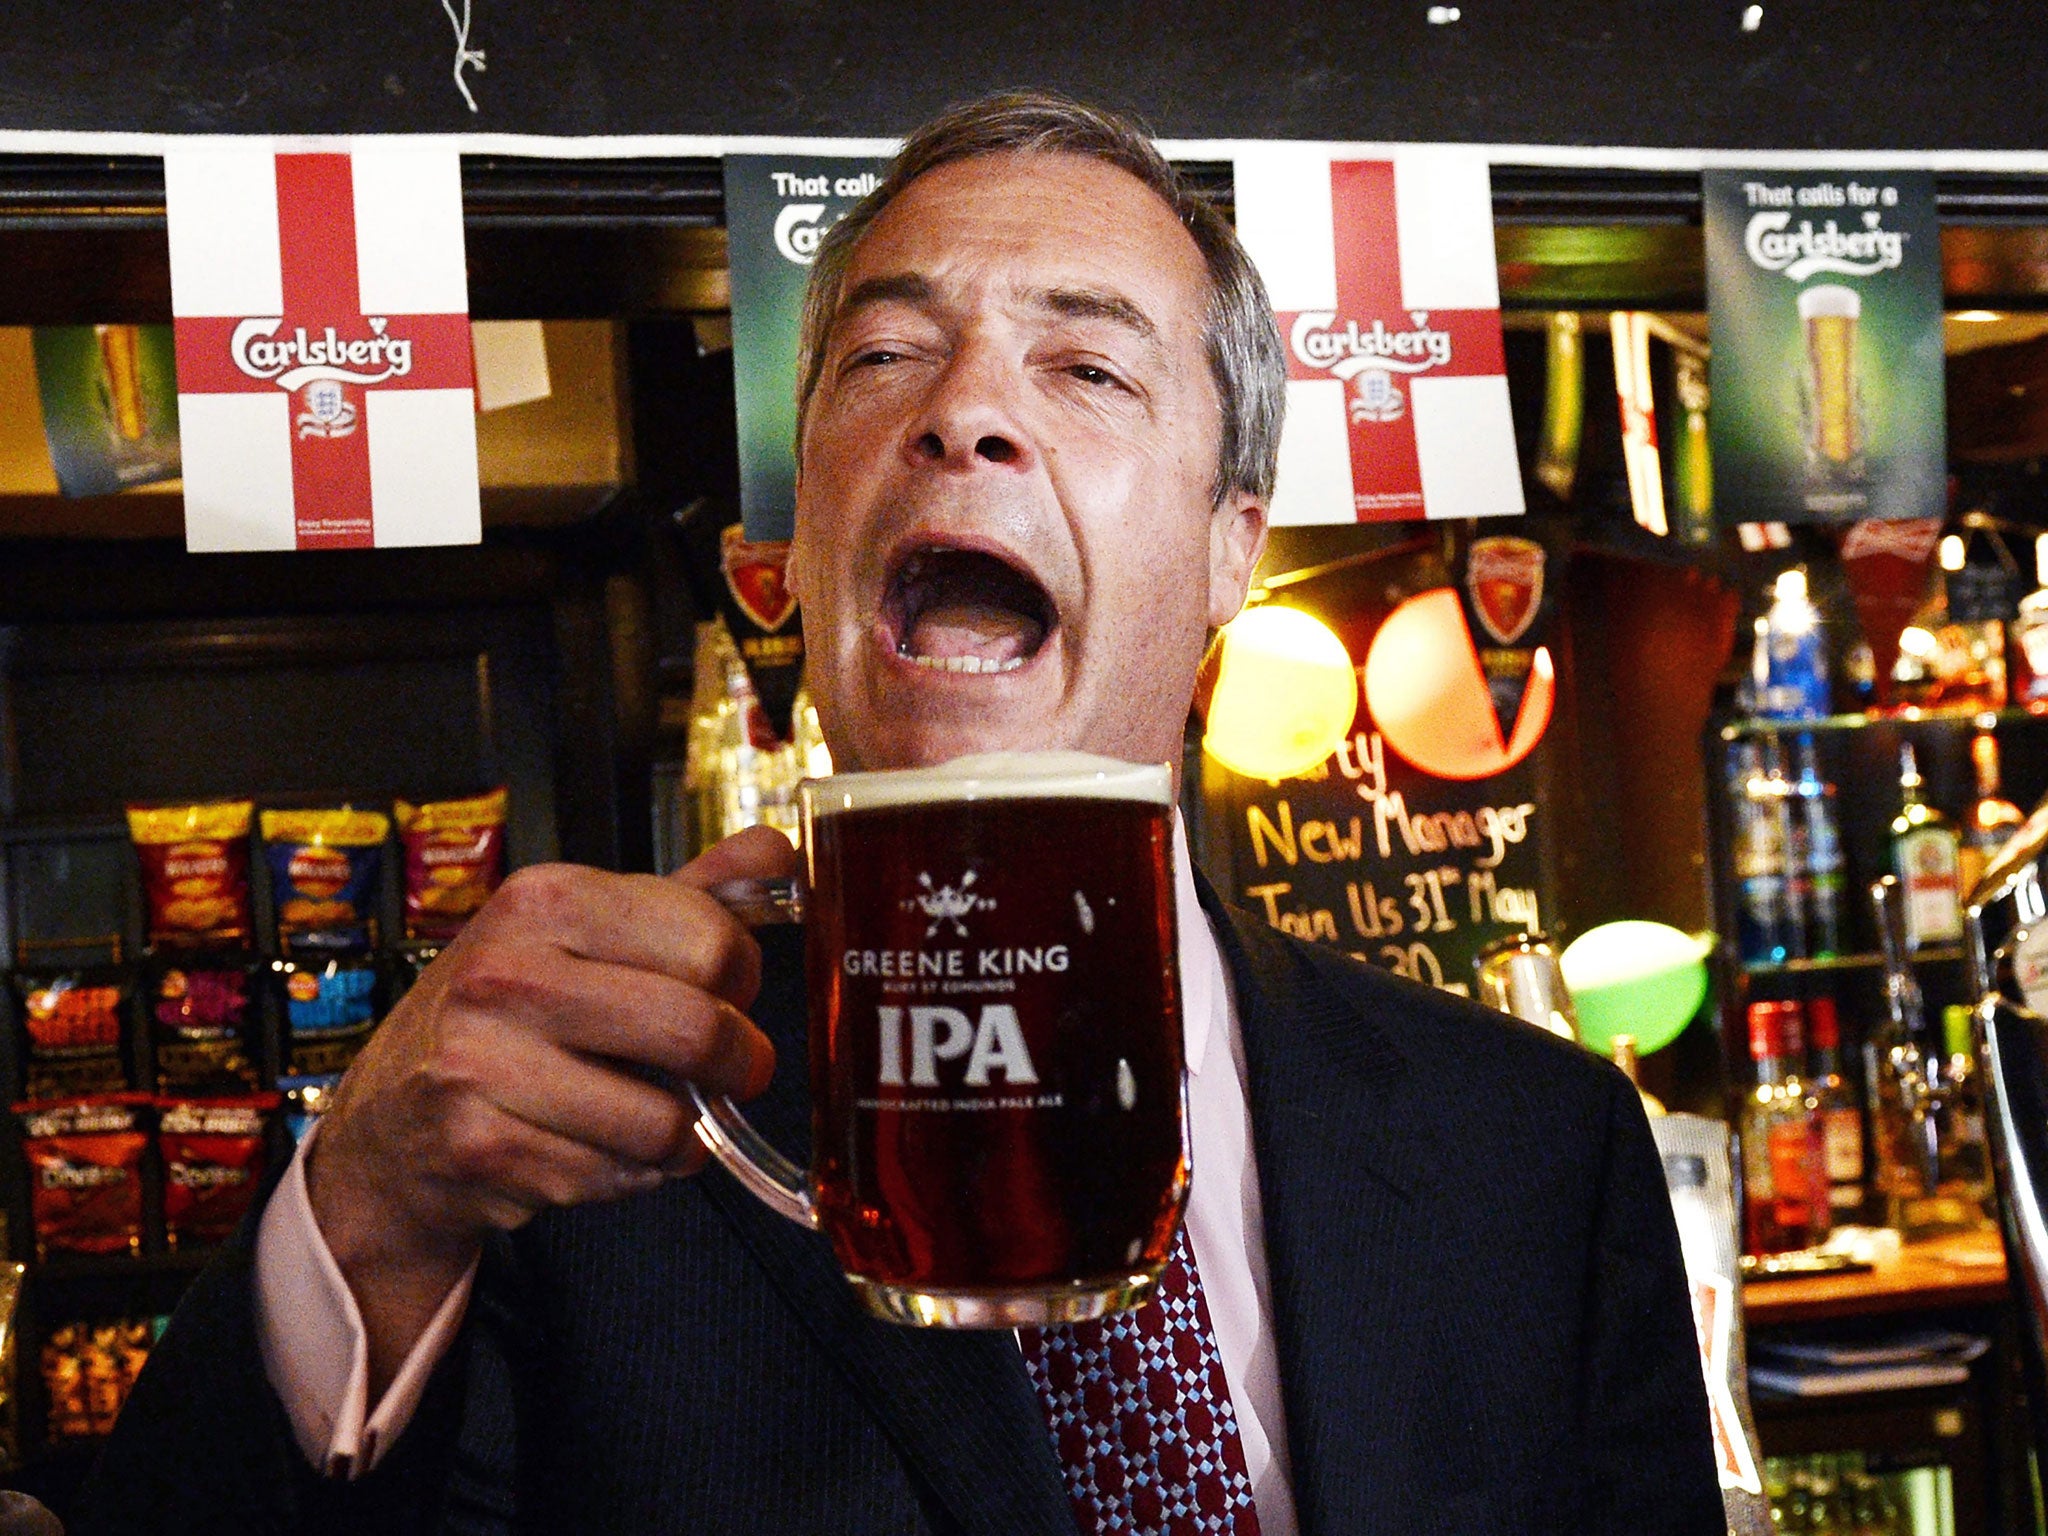 Nigel Farage celebrates with a pint after early local election results in the Hoy and Helmet pub in South Benfleet in Essex